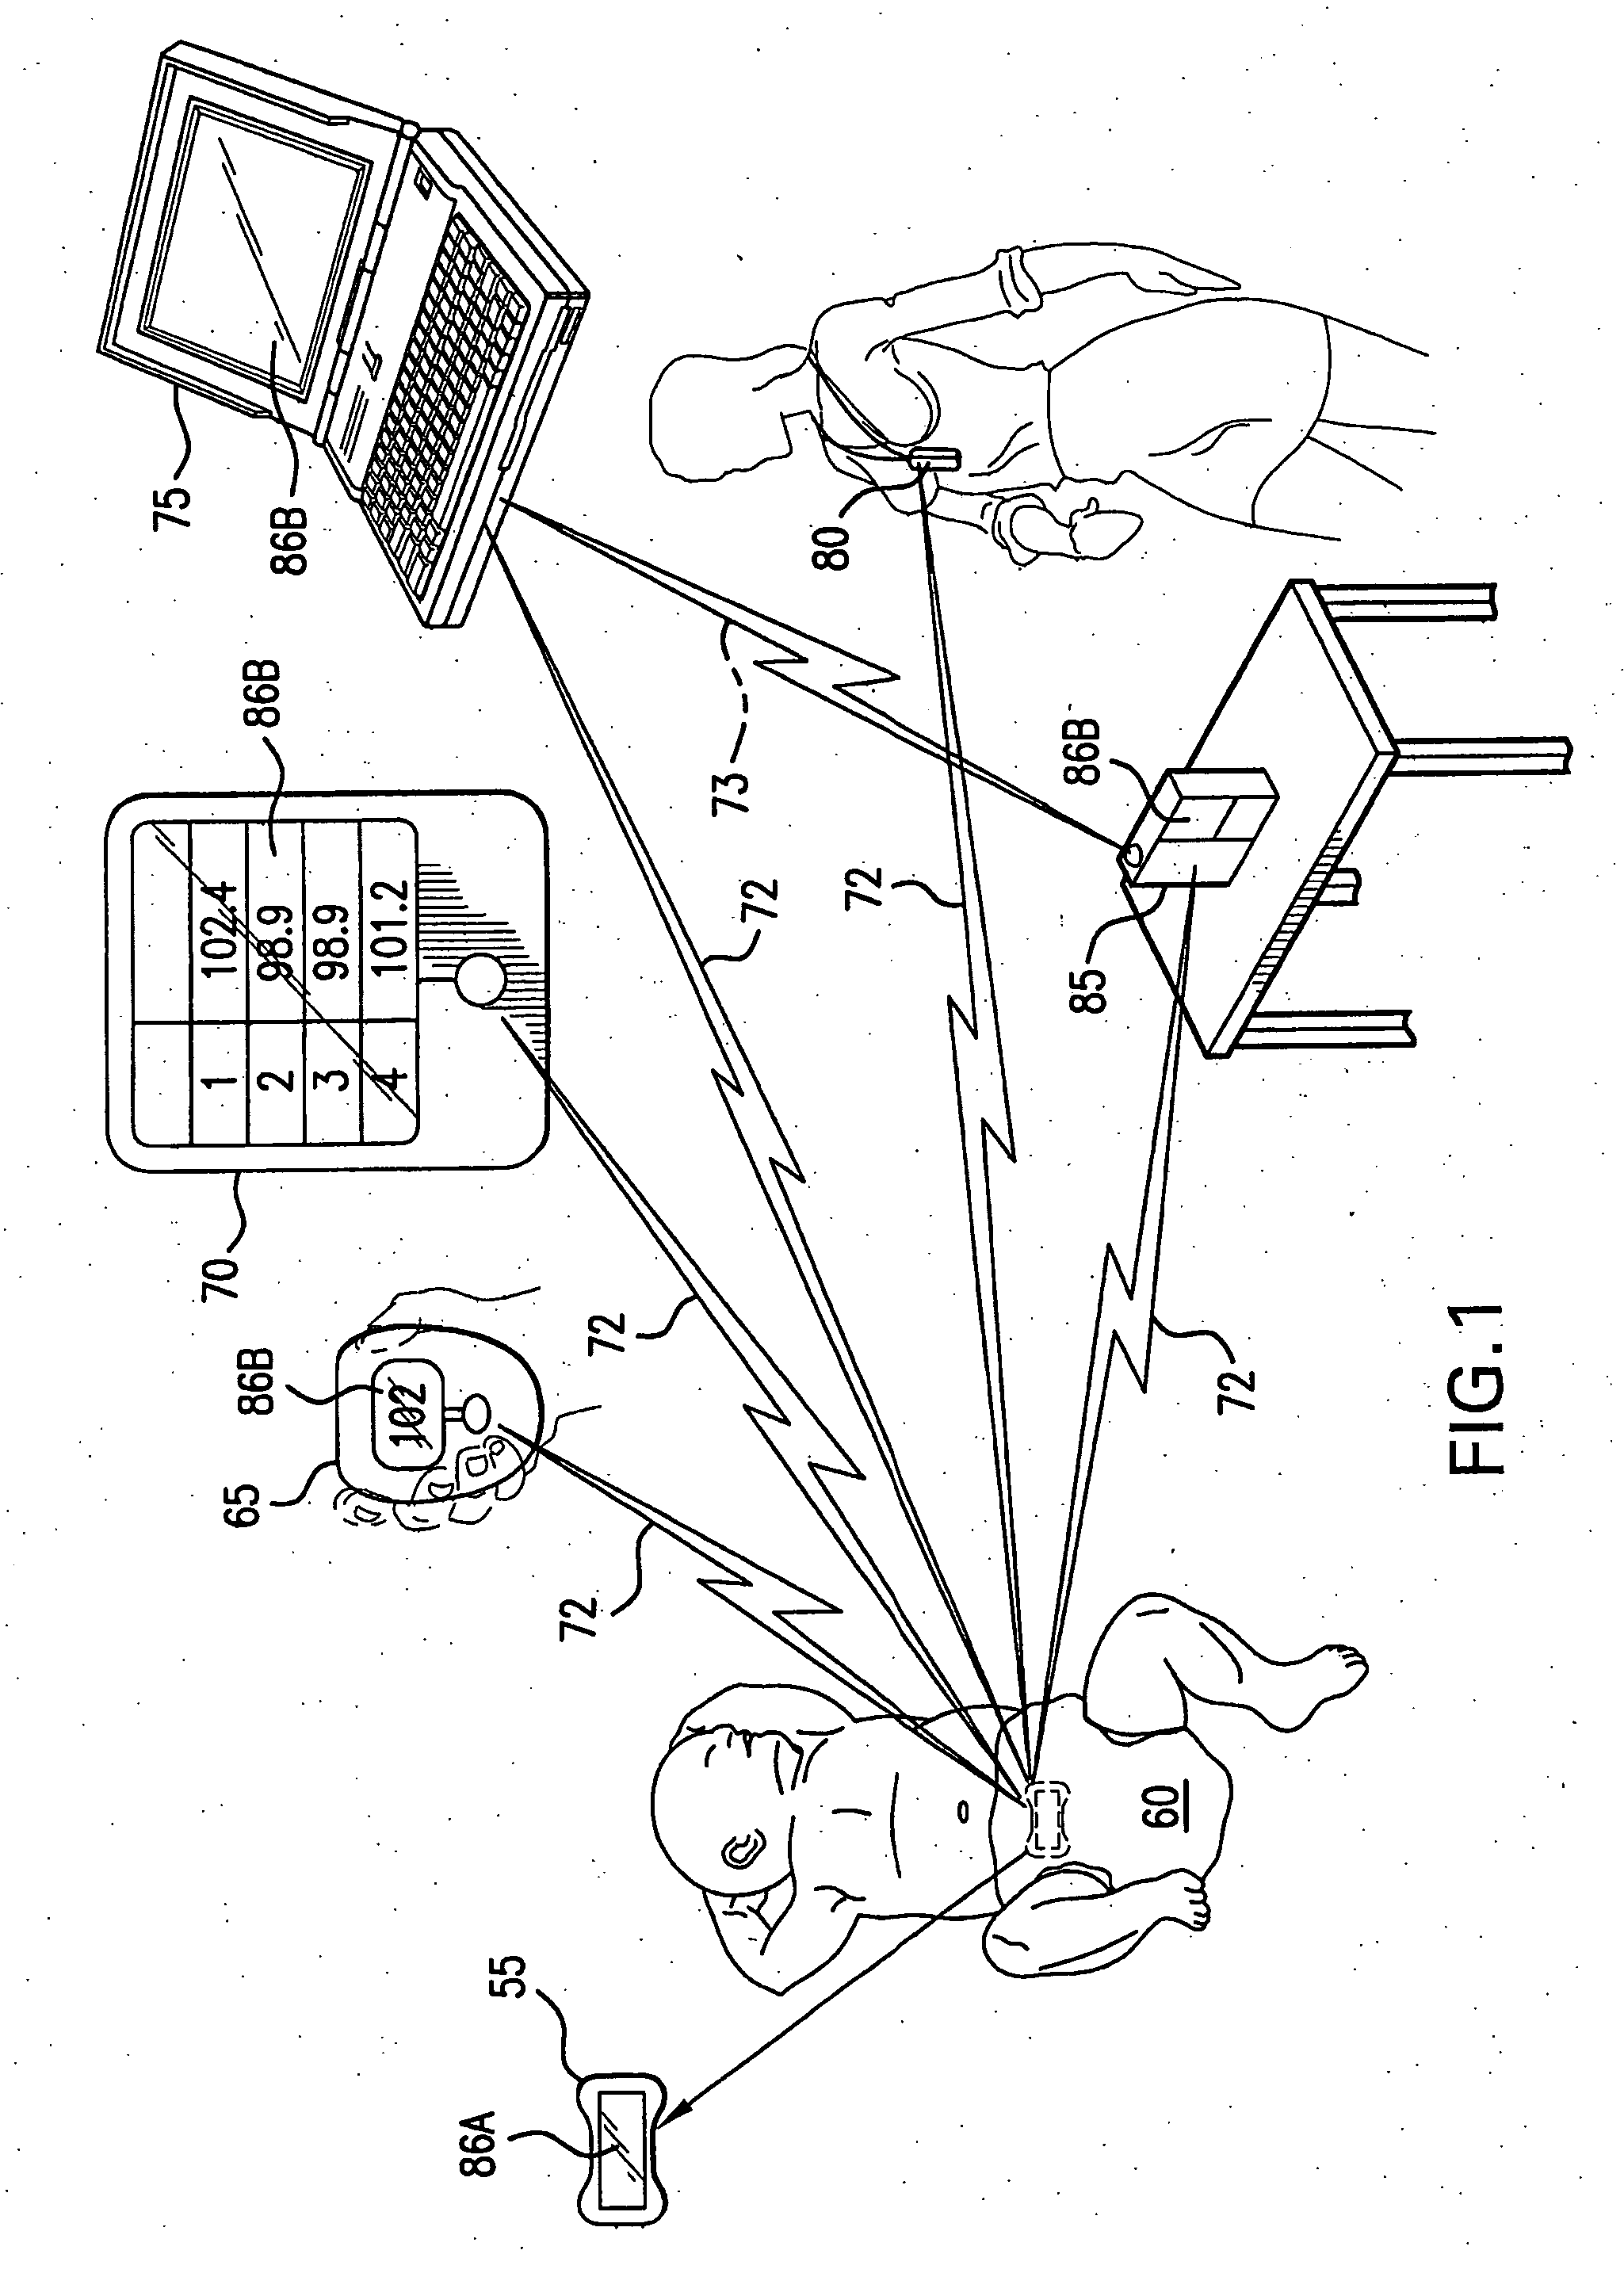 Devices and systems for contextual and physiological-based detection, monitoring, reporting, entertainment, and control of other devices